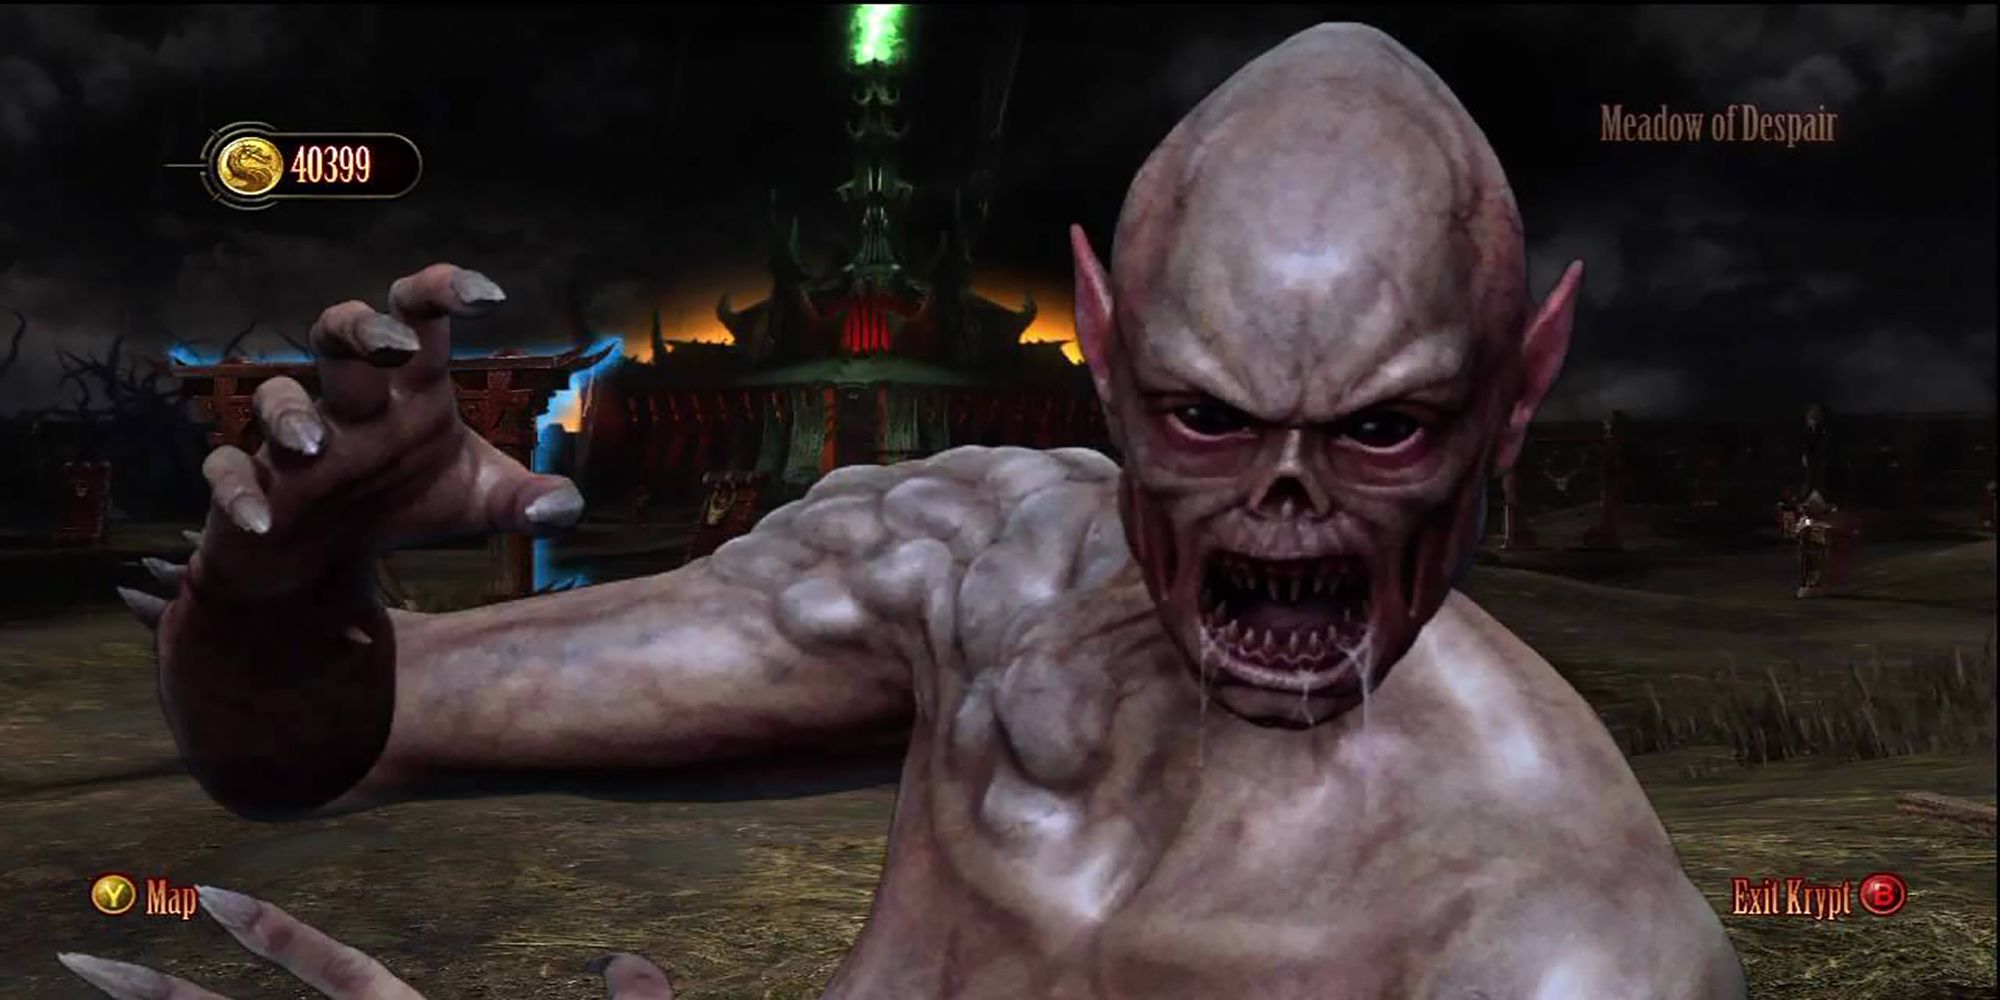 The Krypt Monster, foaming at the mouth, leaps towards the player on the Meadow of Despair from Mortal Kombat 9.